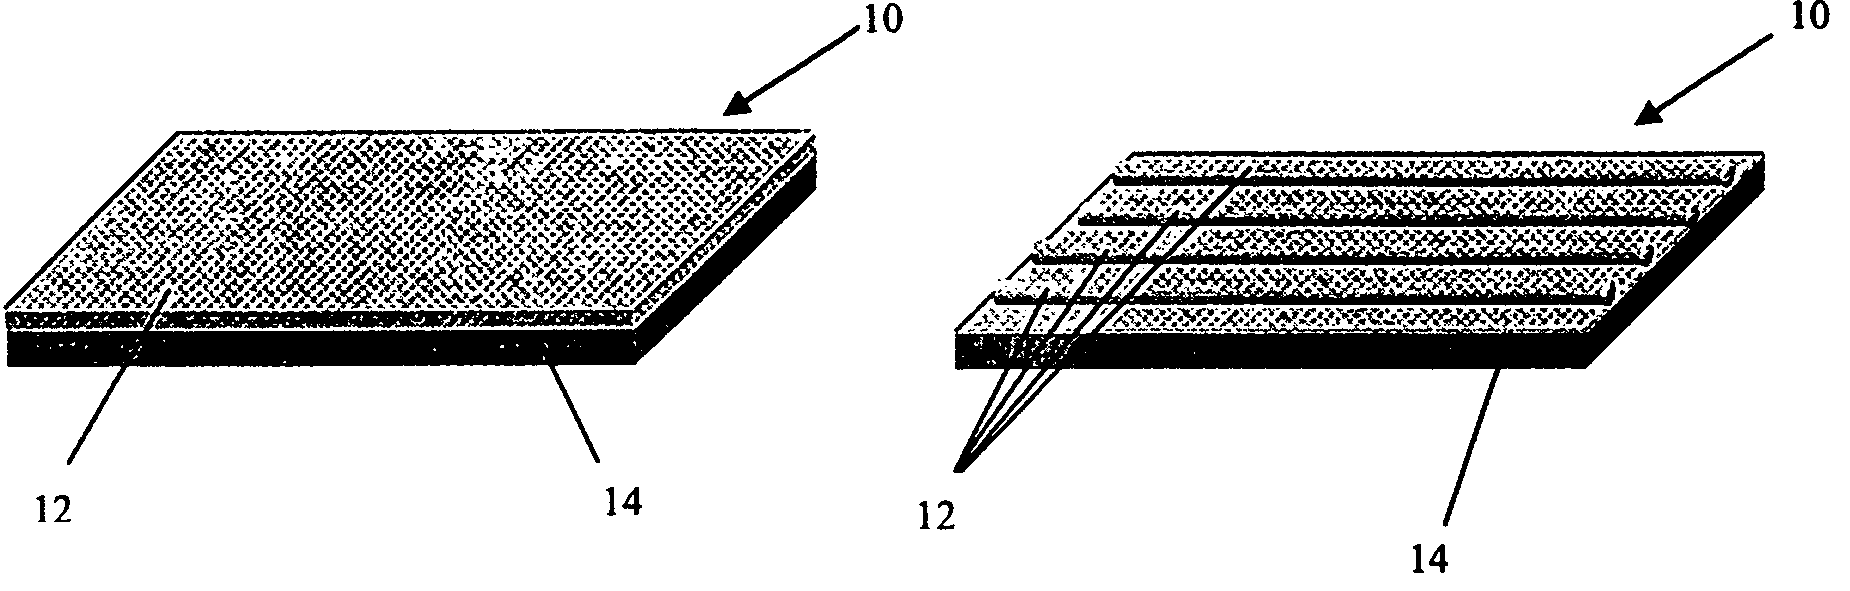 Absorbent articles having a breathable stretch laminate